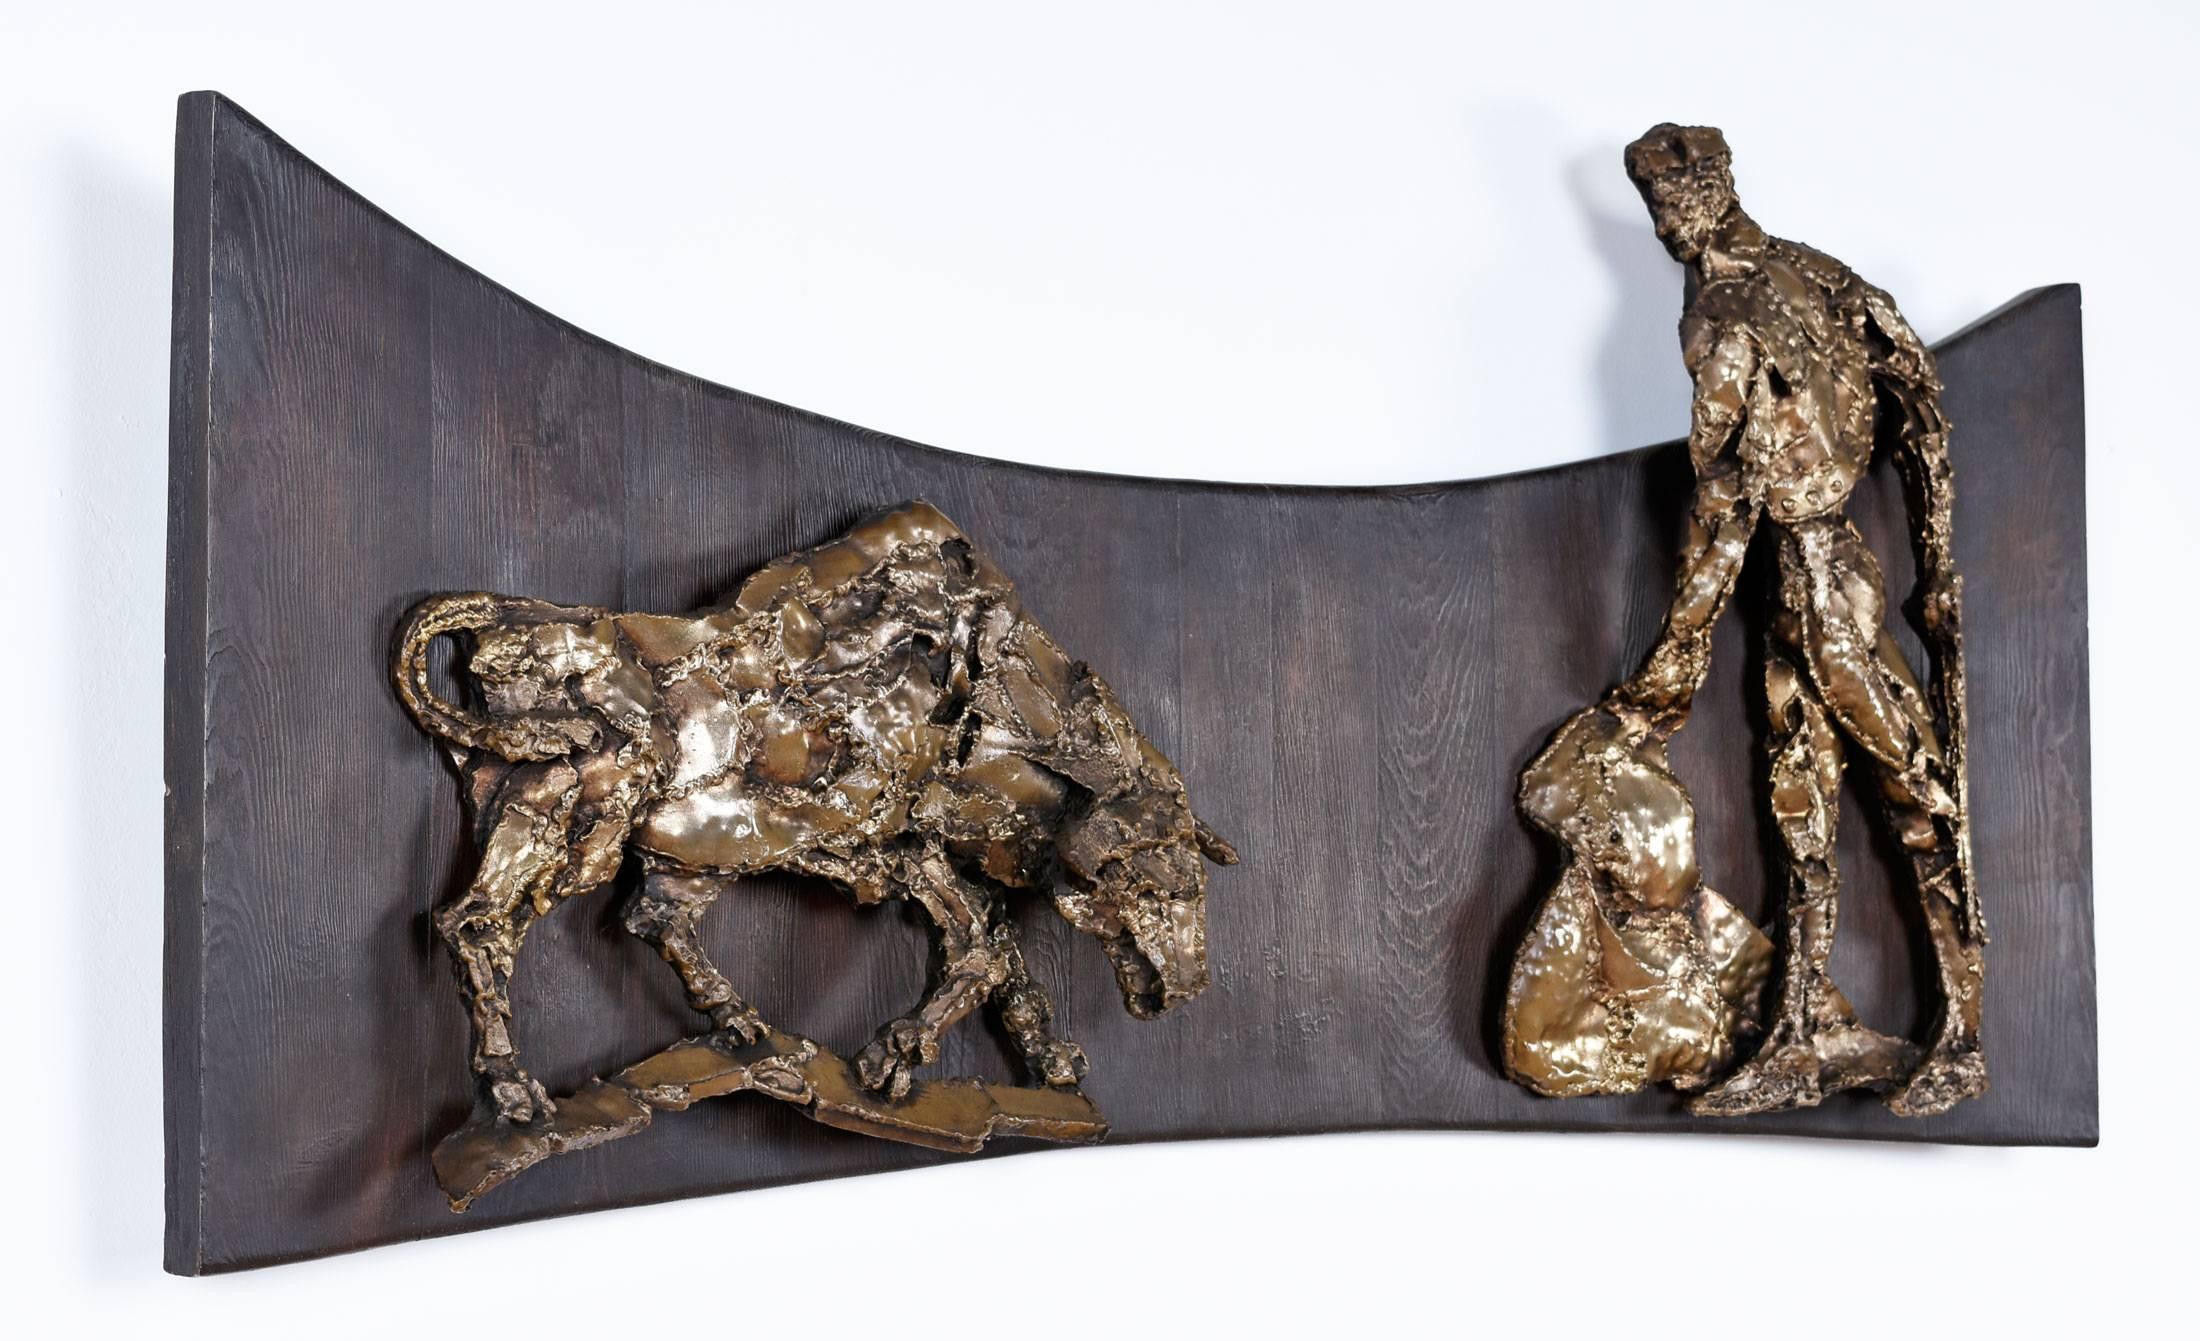 Impressive 5ft x 29.5" three-dimensional wall hanging Brutalist sculpture by Finesse Originals. The matador and bull are constructed of fiberglass made to give the effect of a bronze sculpture. The fiberglass figures are mounted on 1"